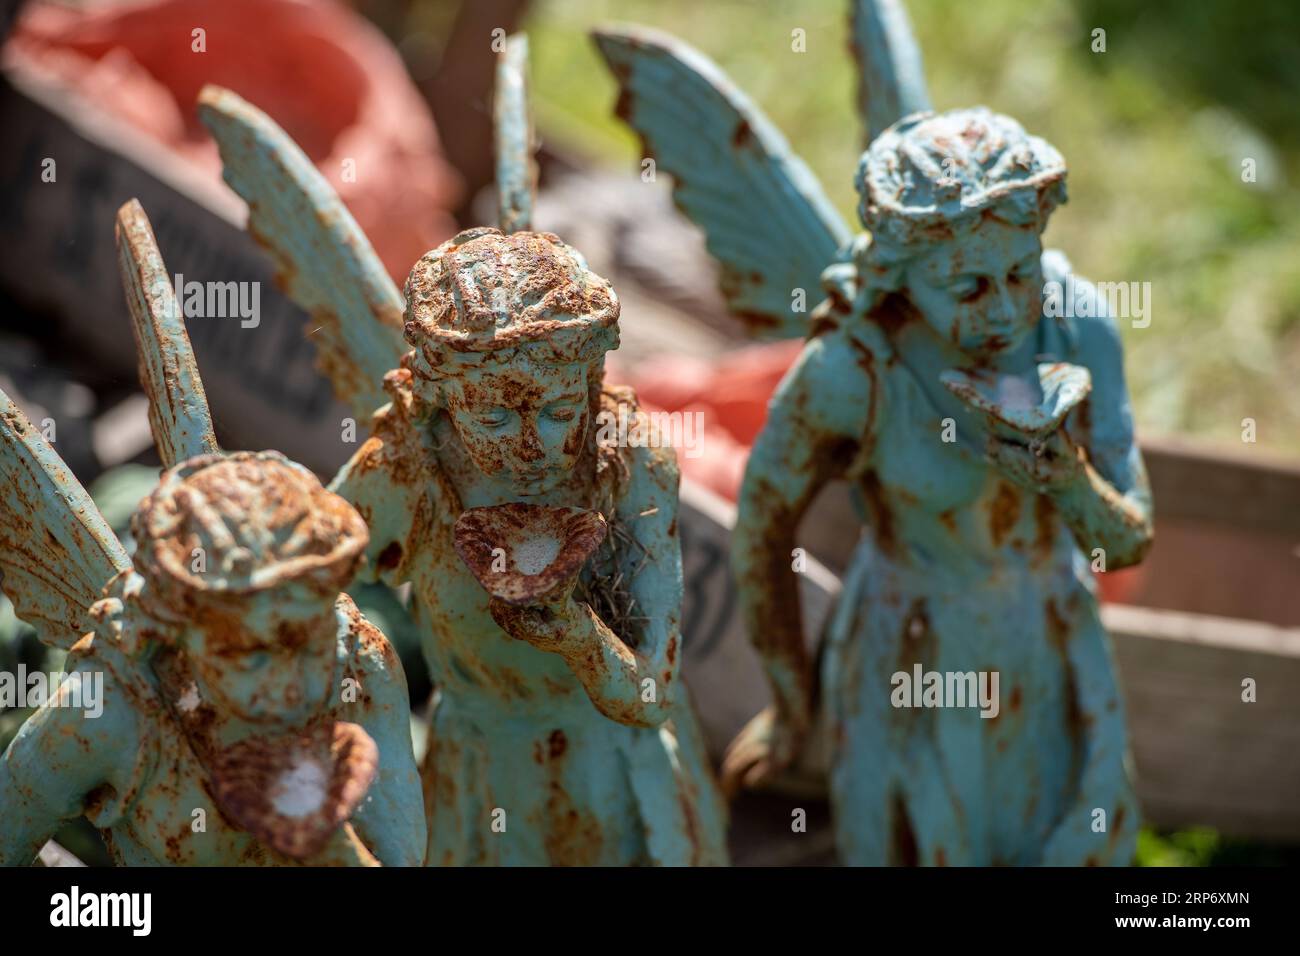 distressed metal garden ornaments on display at a garden centre. rusting and corroded female sculptures at a nursery or garden centre. Stock Photo